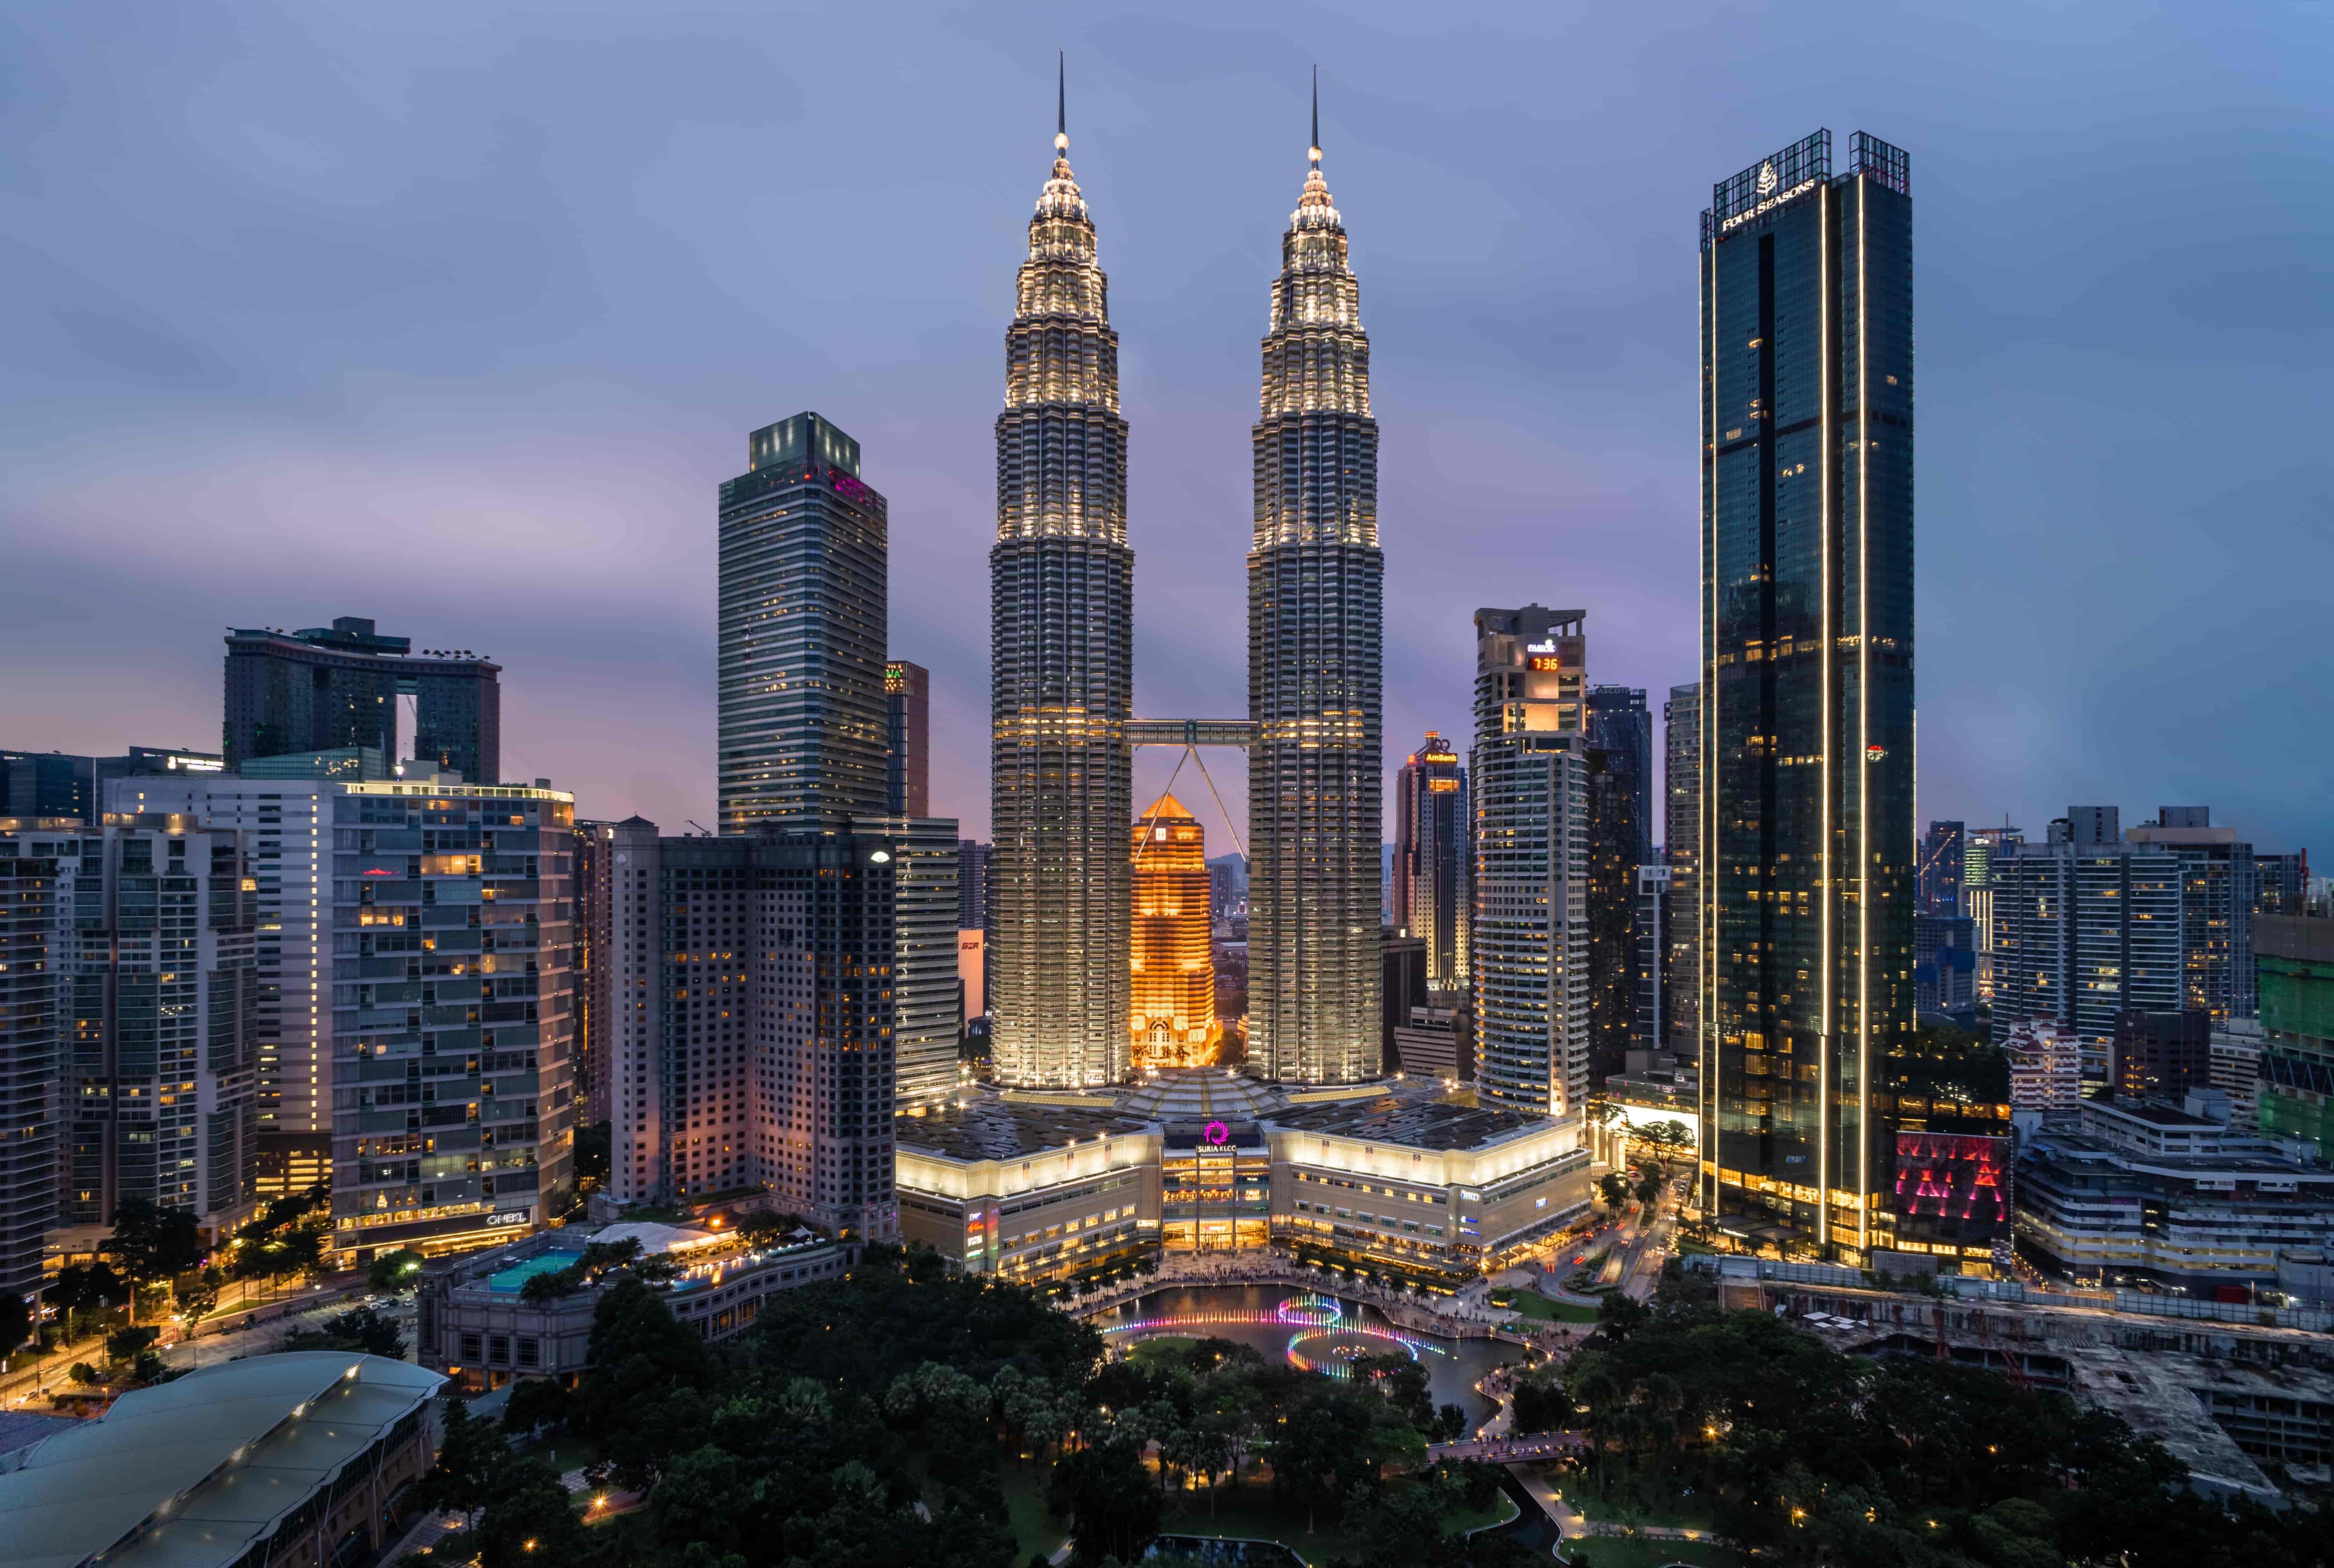 Malaysia’s Economy to Fully Recover in 2021